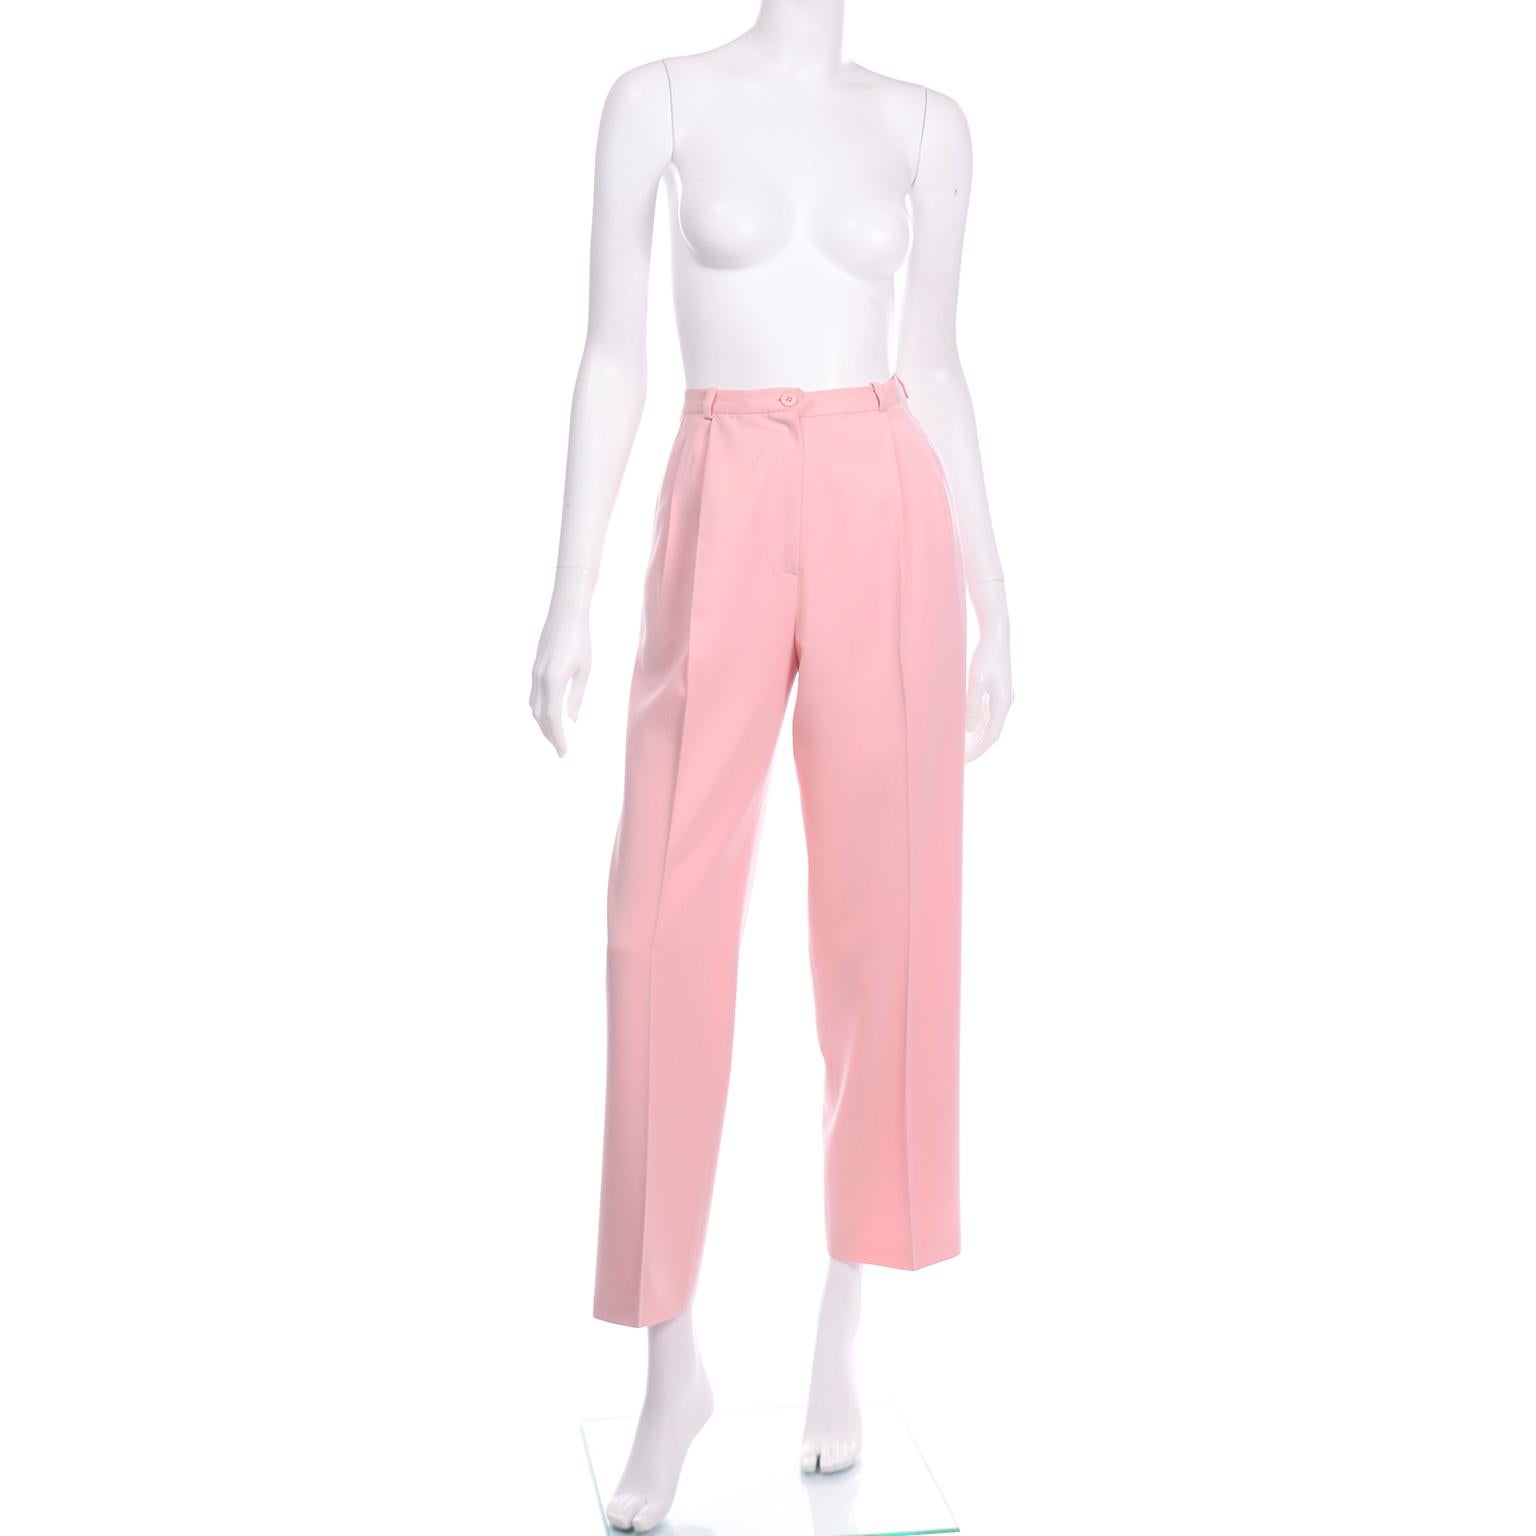 These vintage Salvatore Ferragamo pink wool trousers have sleek pleated straight leg and would fit in to any modern wardrobe. The pants have a waistband with small belt loops and  two front pleats with a pressed center pleat down the leg to the hem.